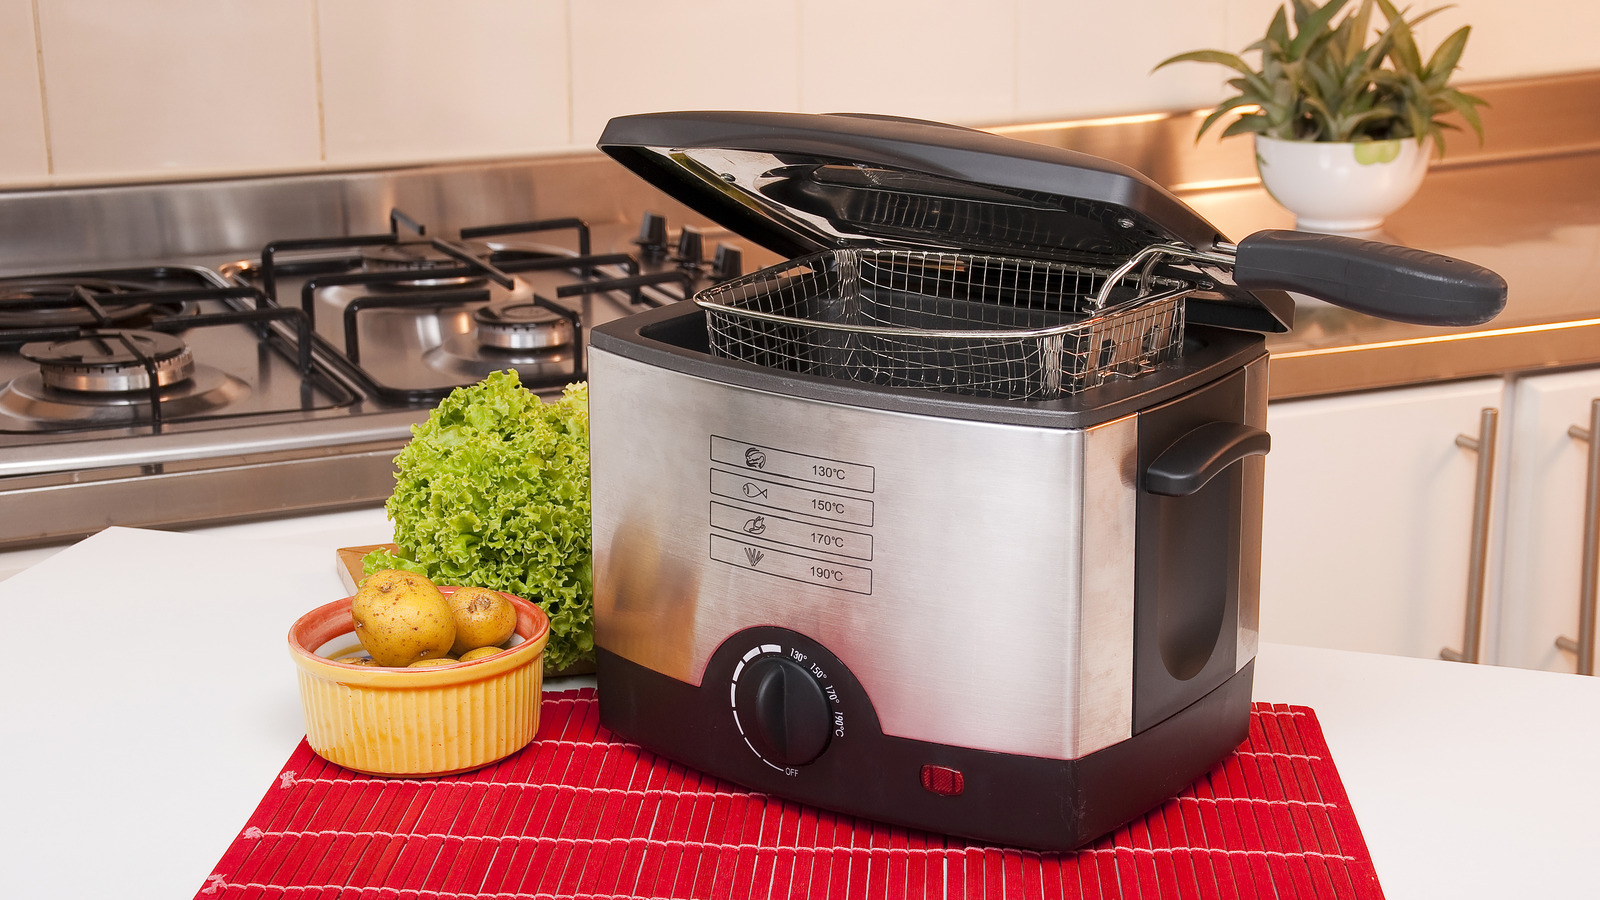 The Potential Drawbacks Of Cooking With An Electric Fryer